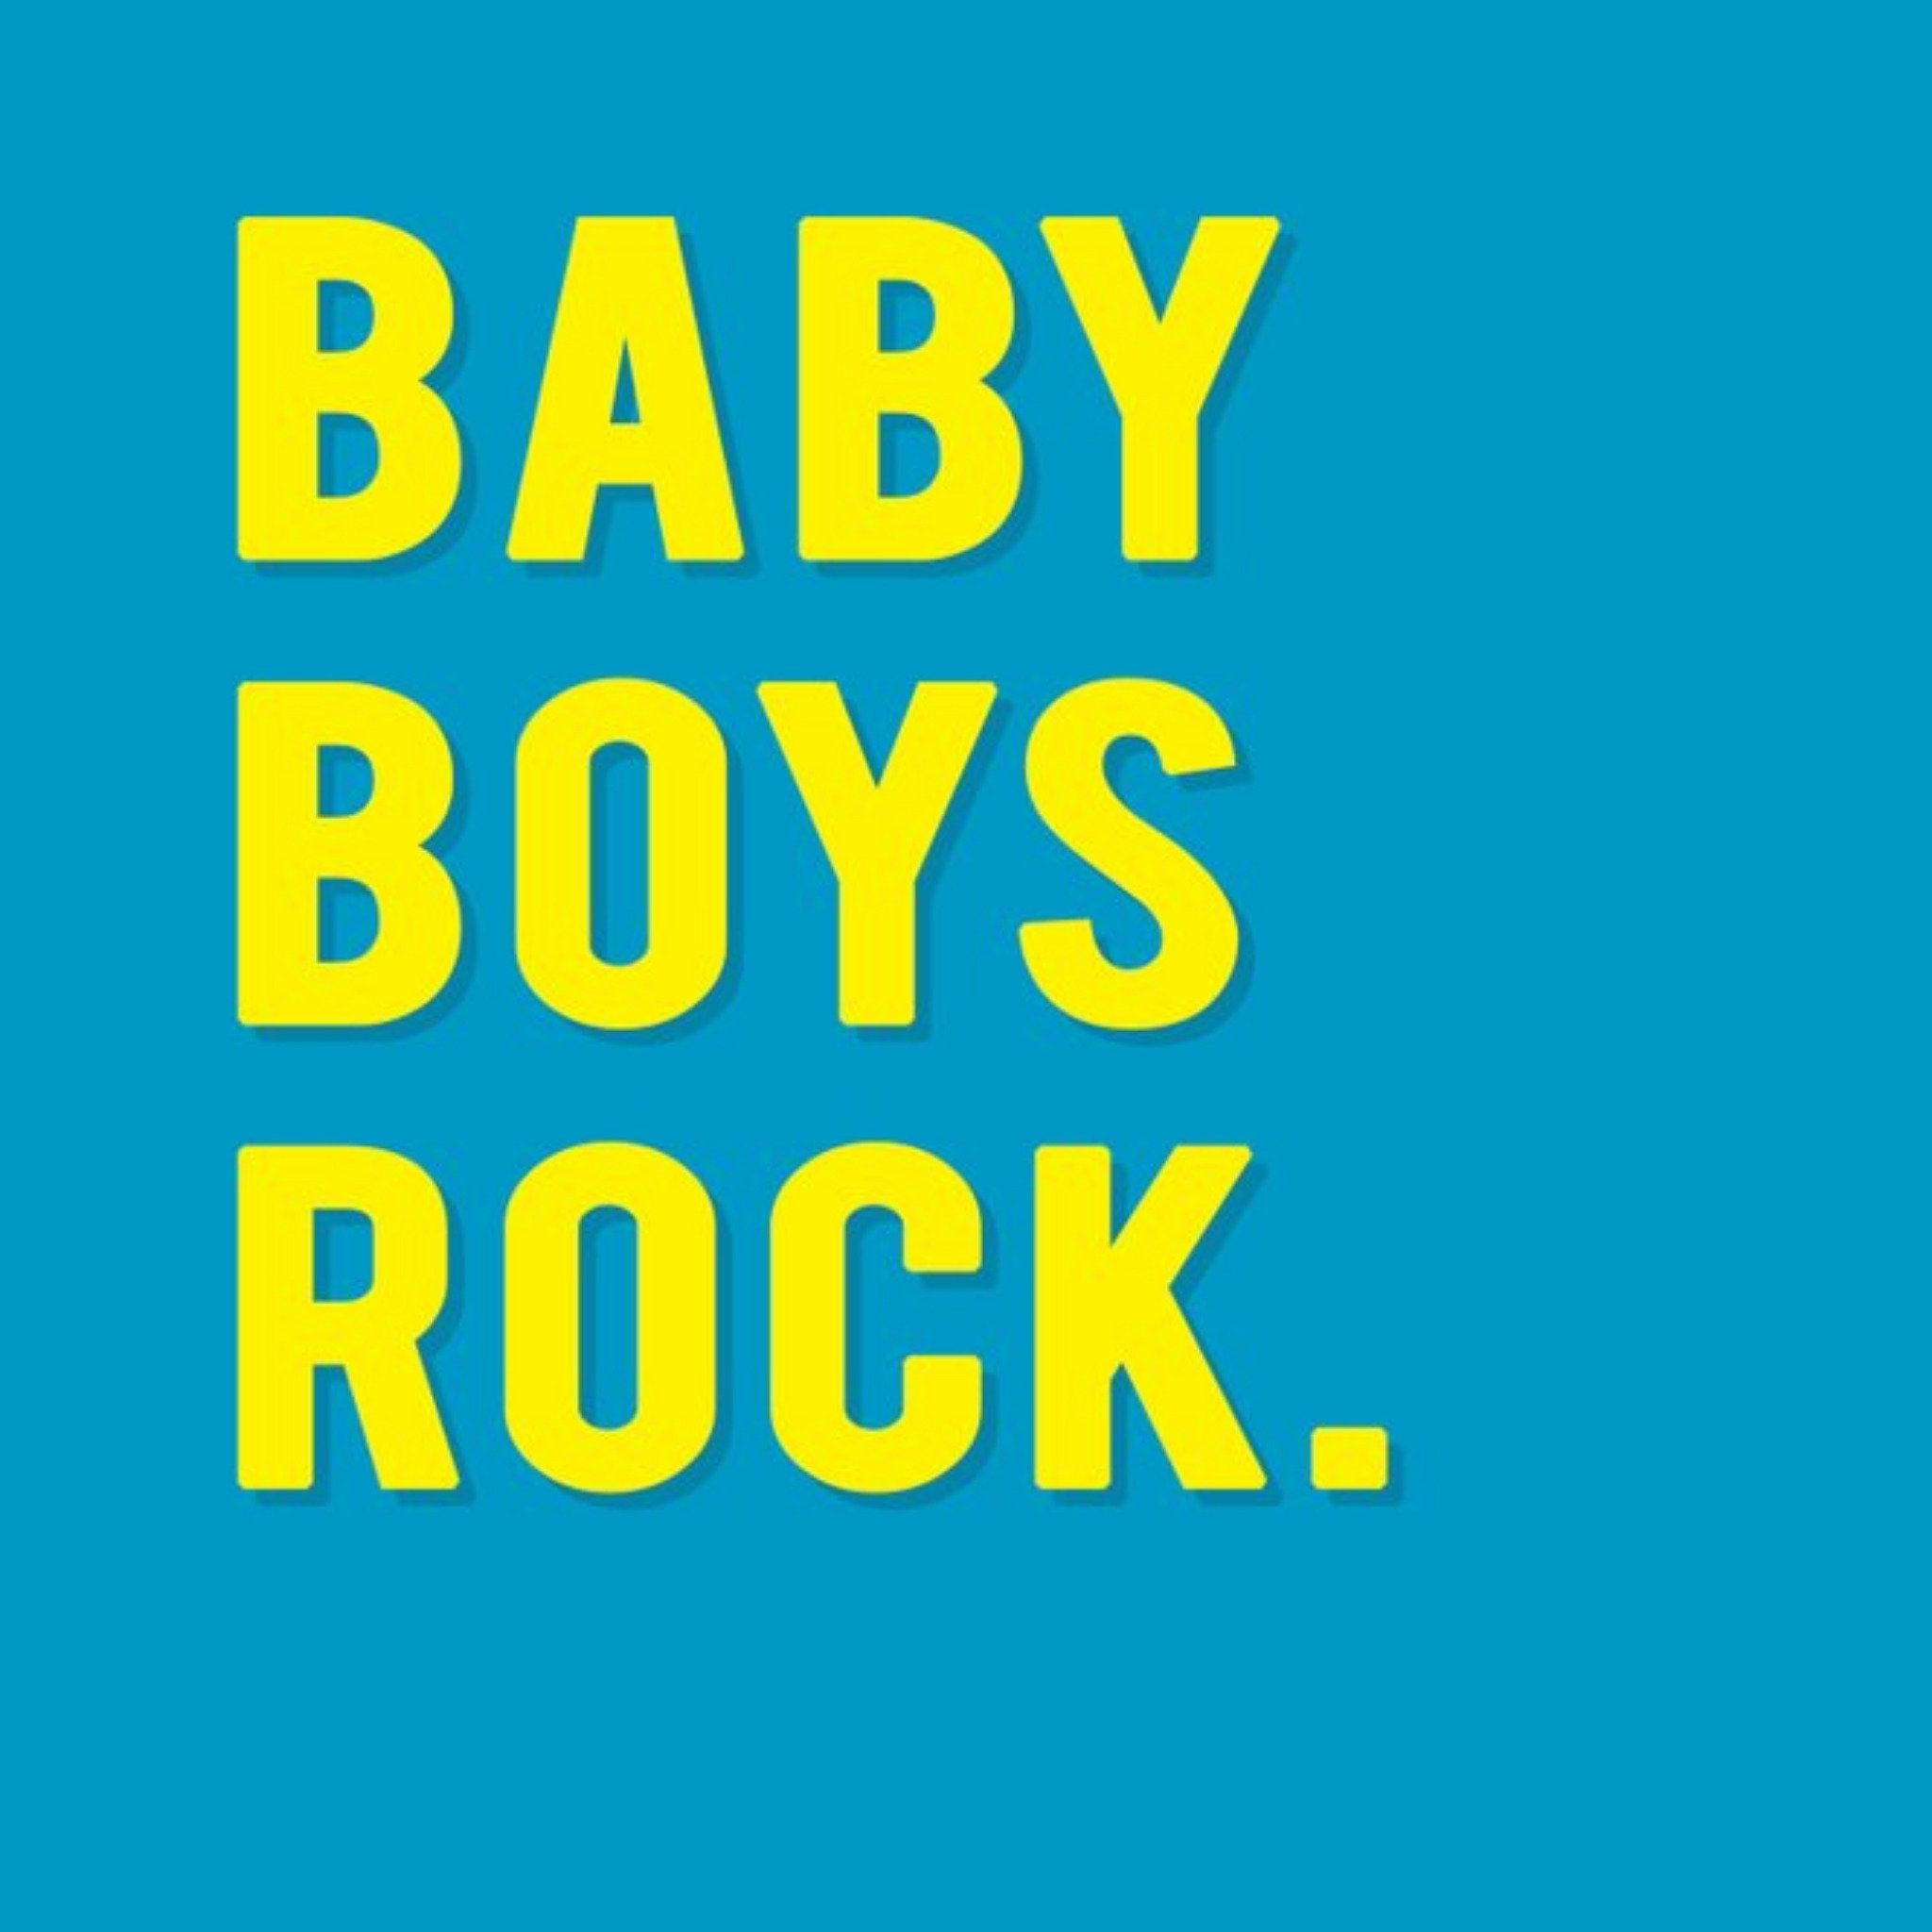 Moonpig Modern Typographical Baby Boys Rock Card, Large